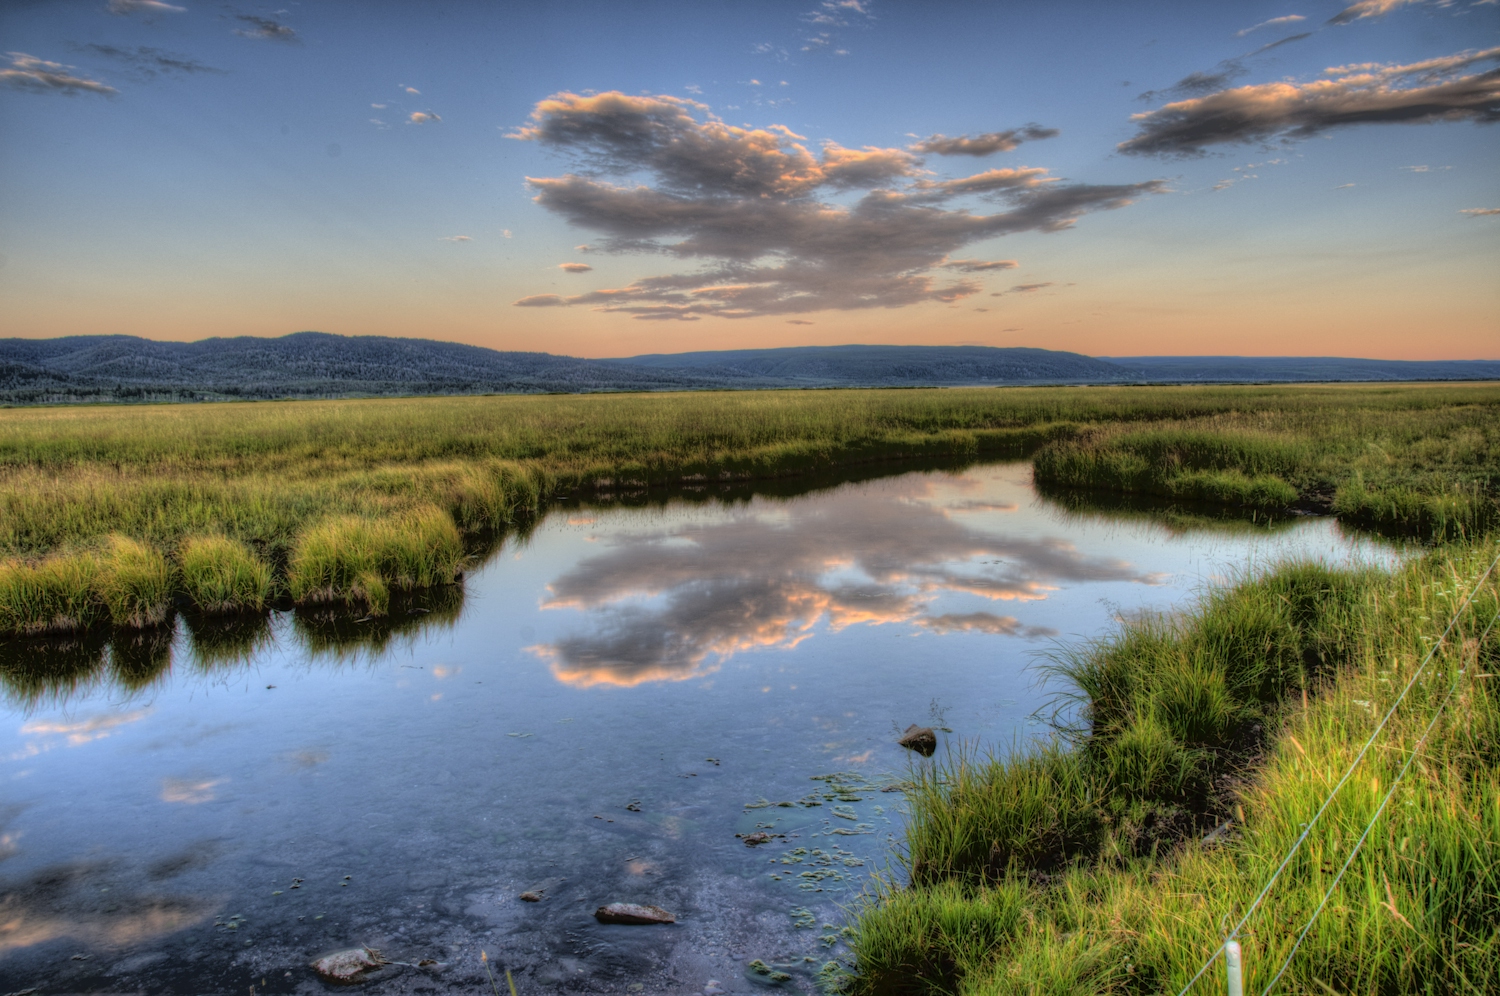 A river meanders through a grassy landscape at sunset.